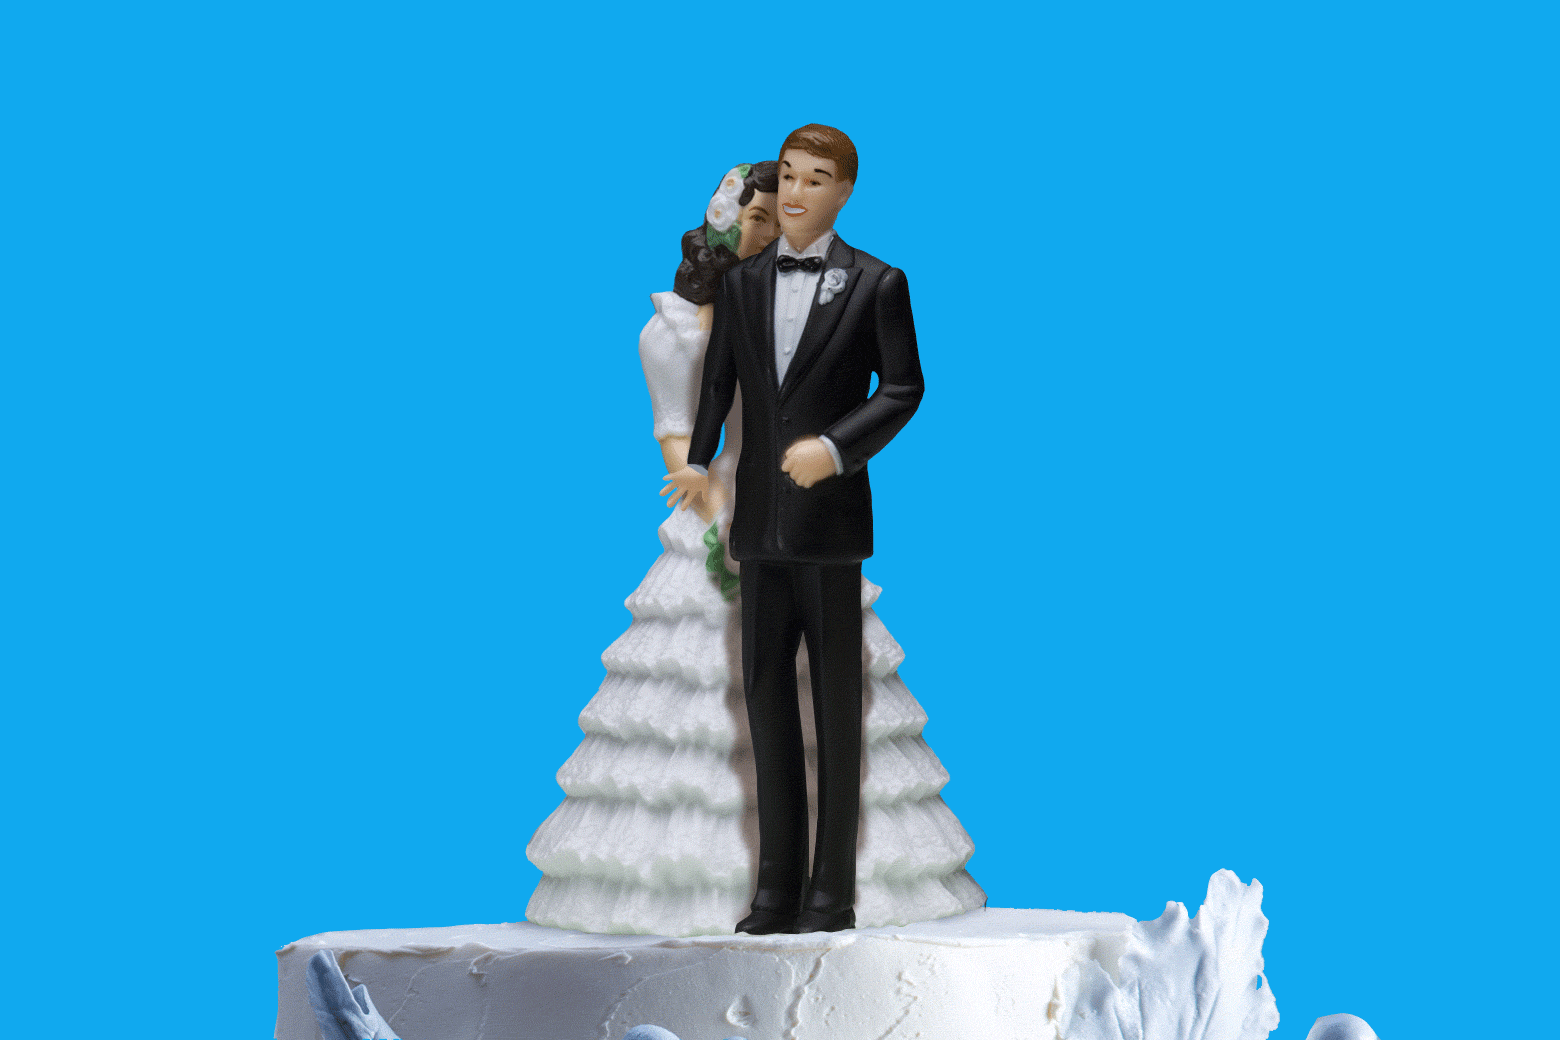 Wedding cake with bride and groom toppers, where the groom is standing in front of the bride.